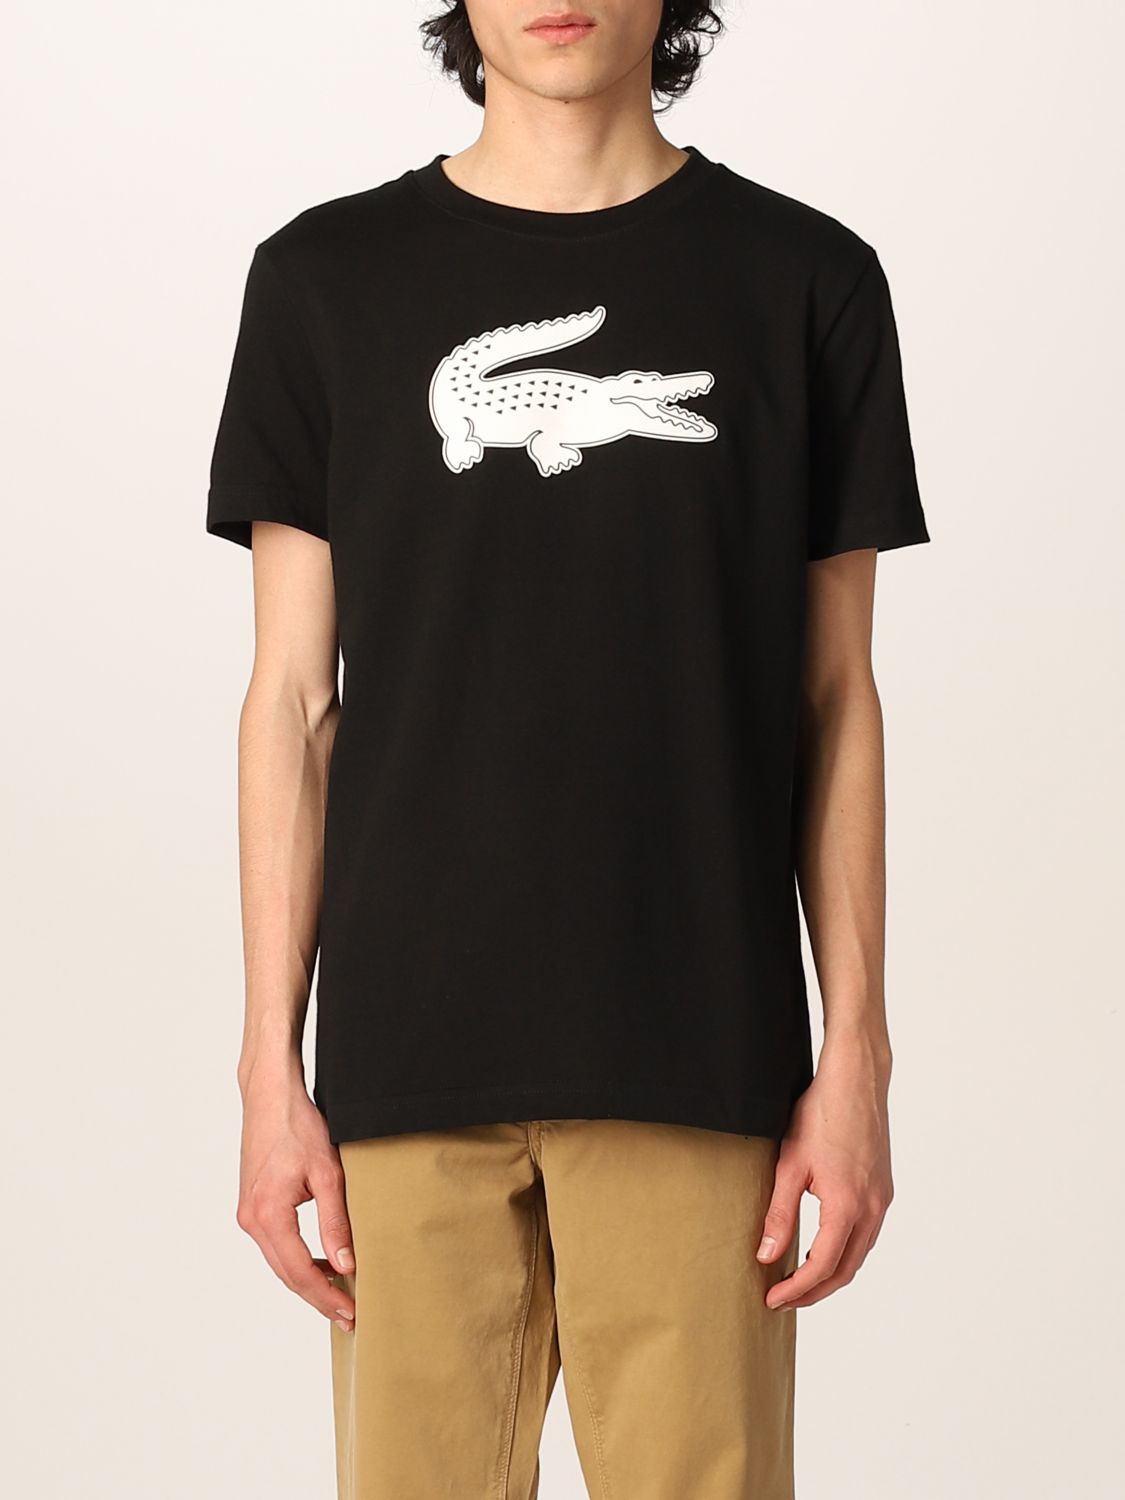 LACOSTE: t-shirt for man - Black | Lacoste t-shirt TH2042 online on ...